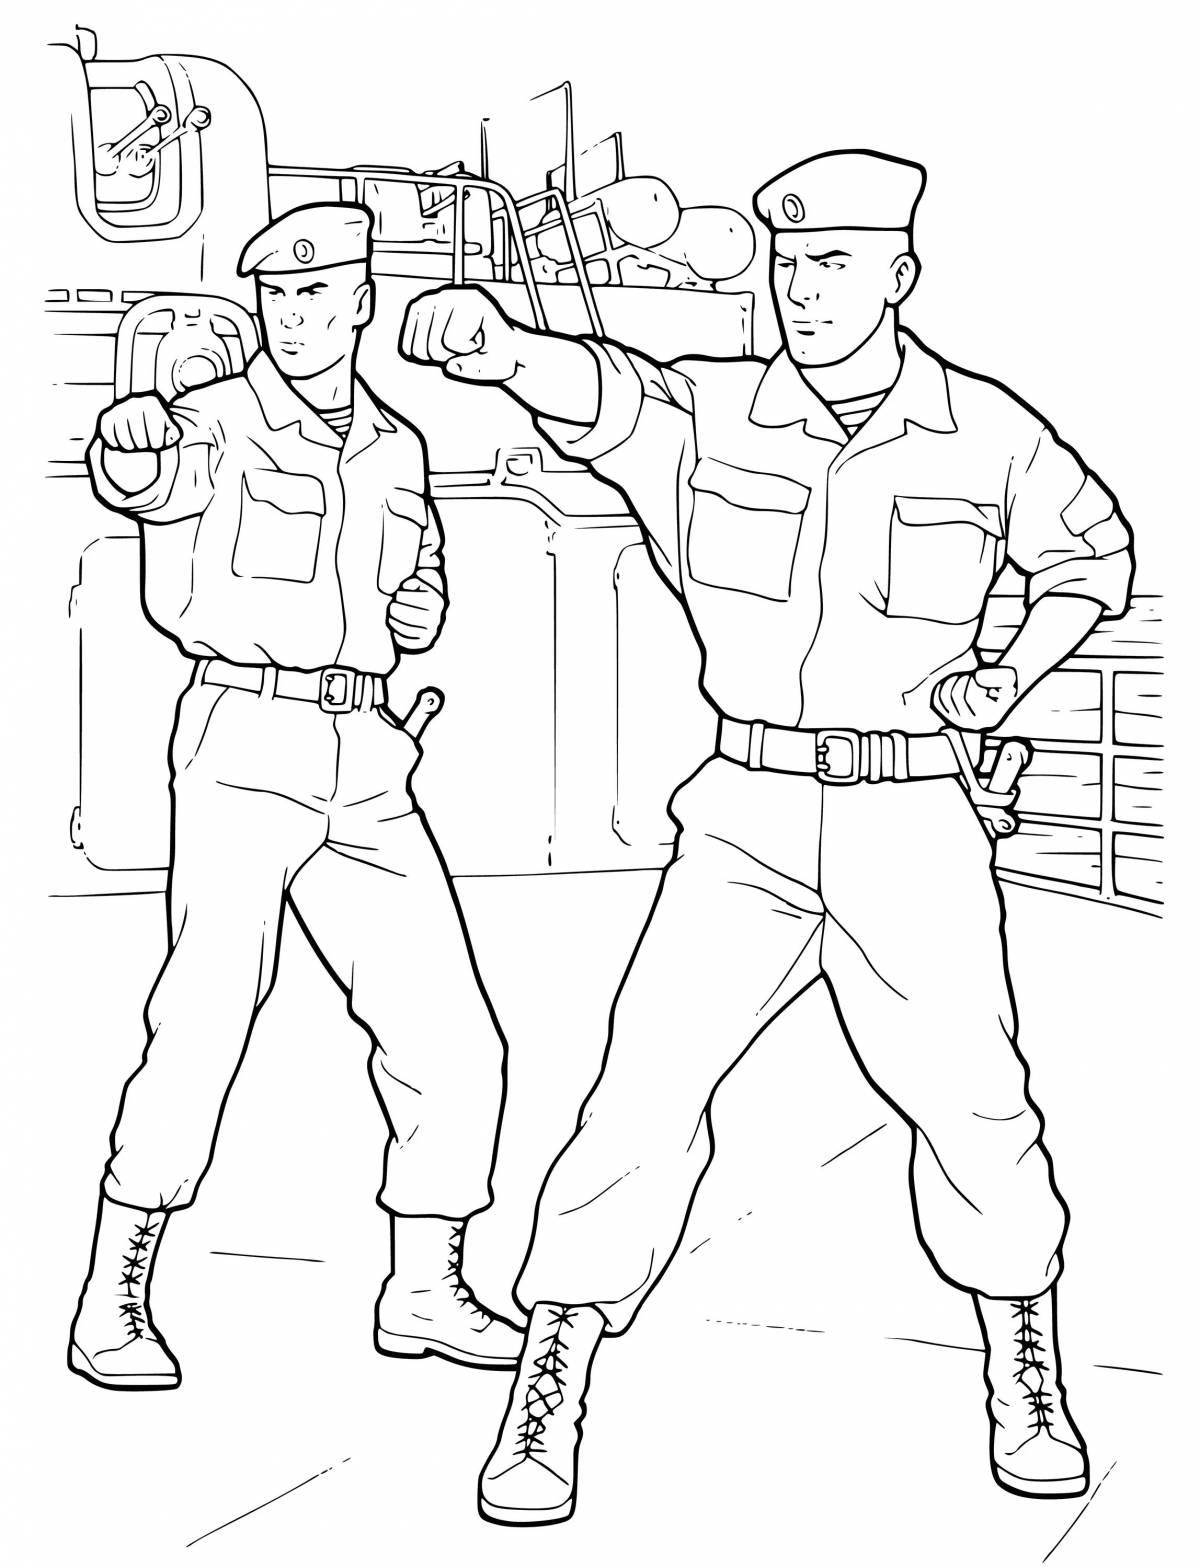 Impressive Russian soldier coloring page